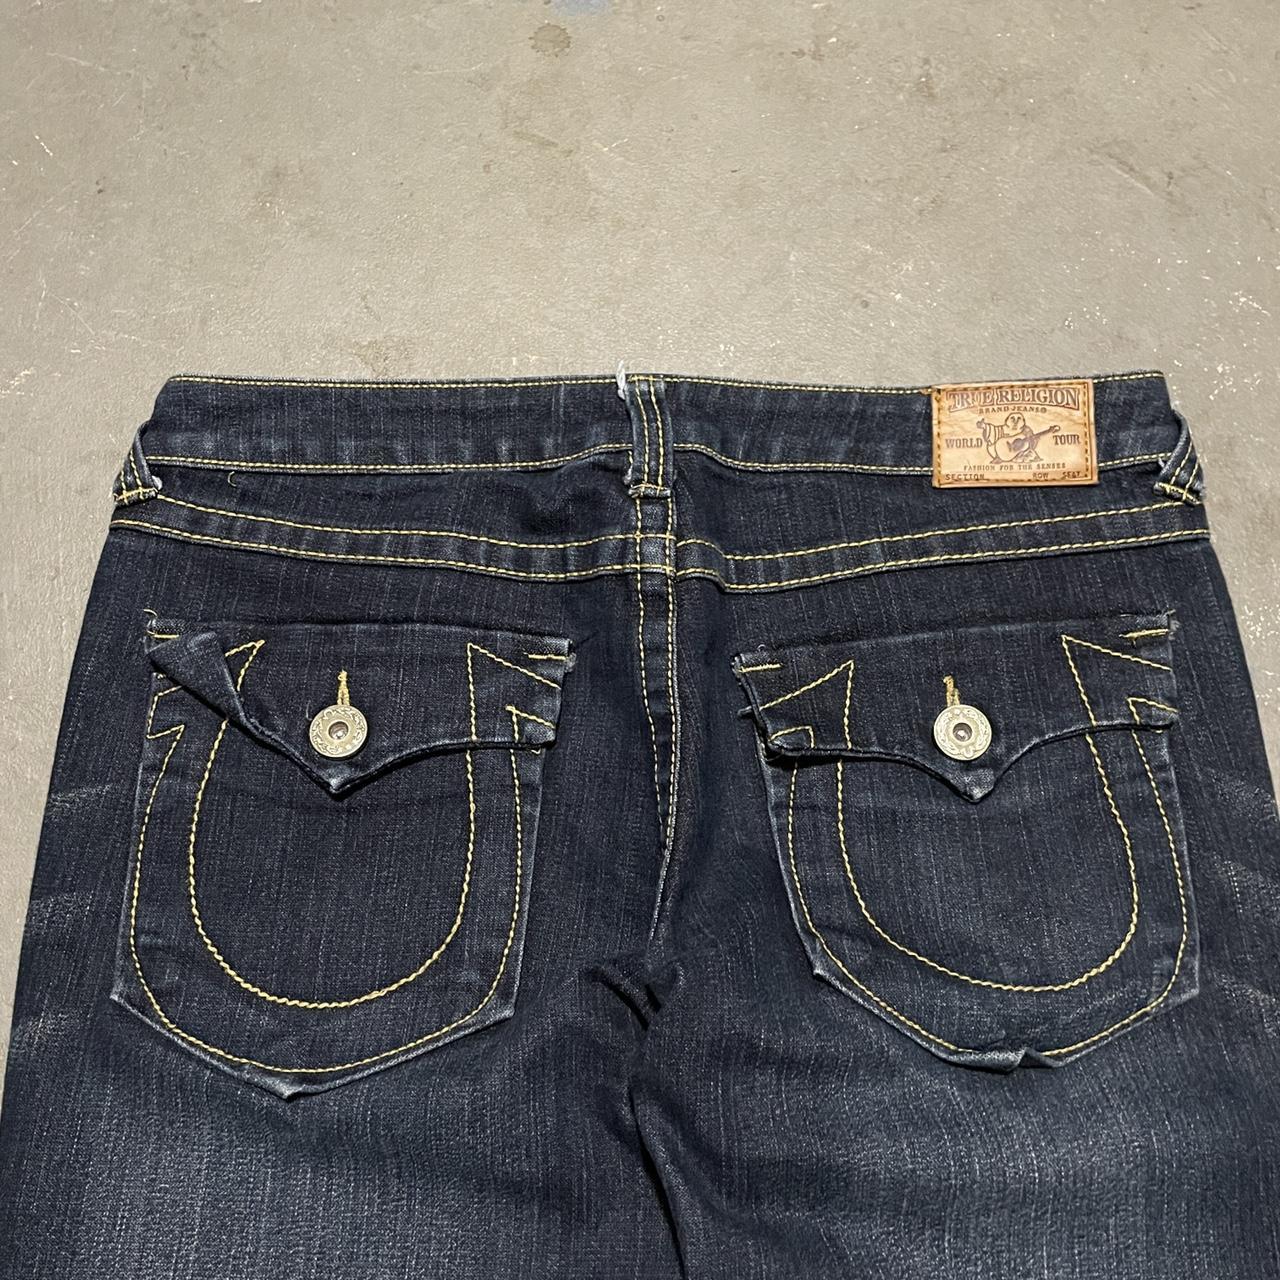 True Religion Women's Blue and Navy Jeans (3)